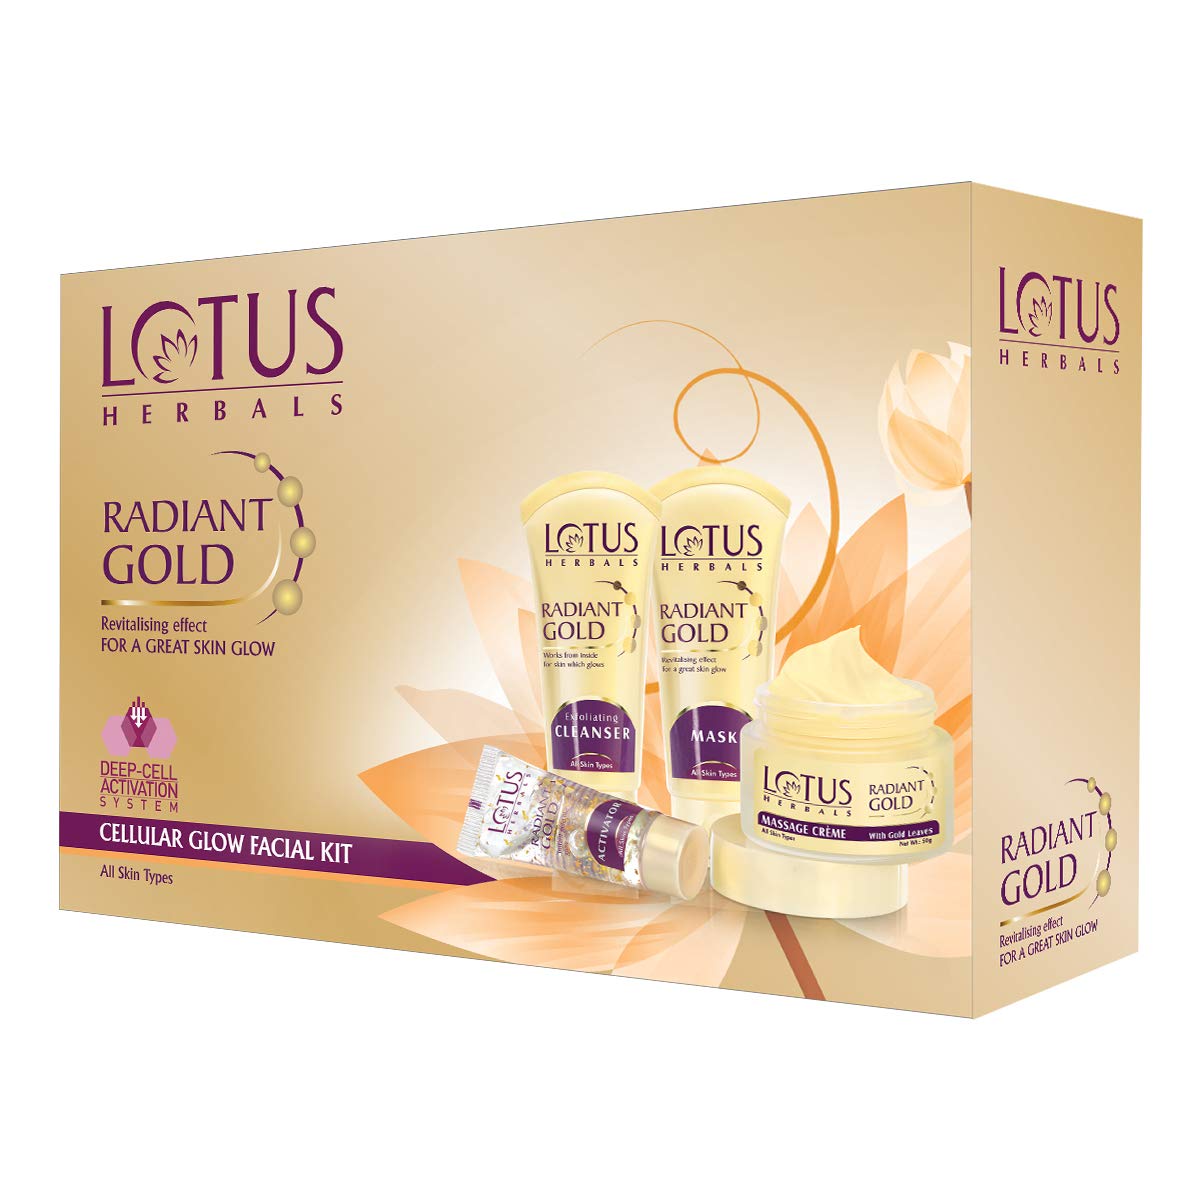 Buy Lotus Herbals Radiant Gold Facial Kit for instant glow with 24K Pure Gold & Papaya